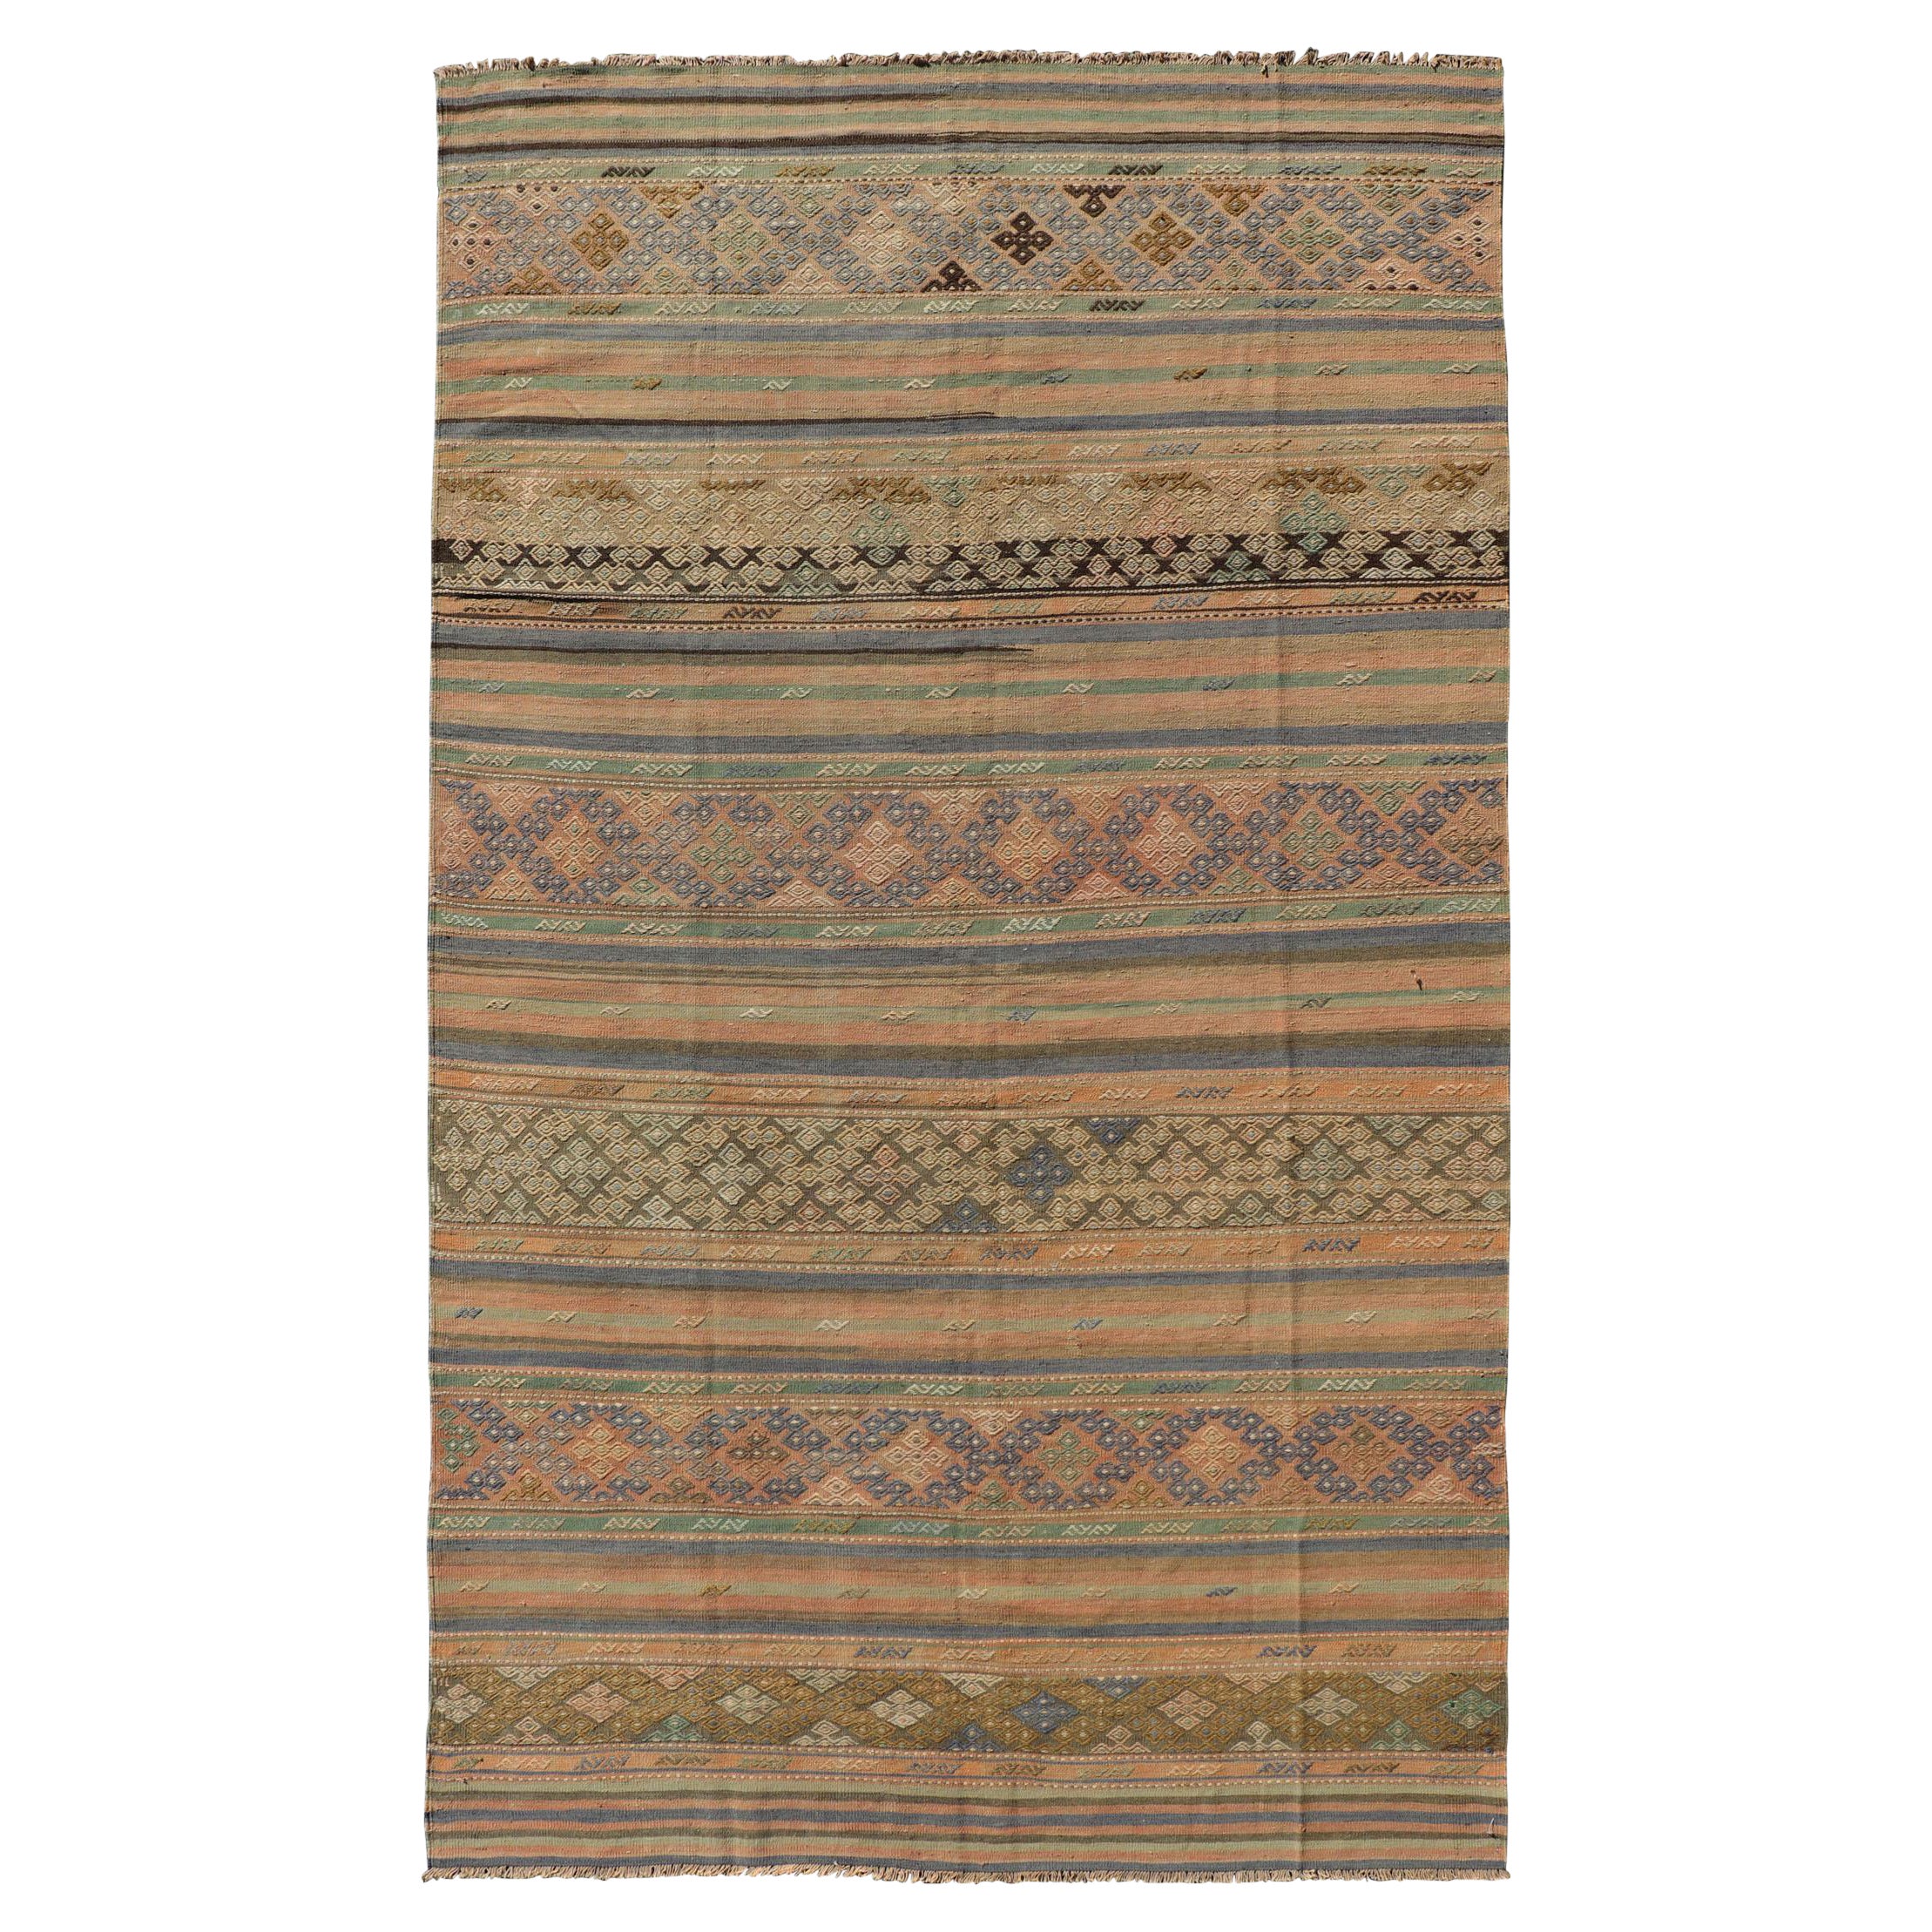 Vintage Striped Turkish Kilim Rug with Geometric Shapes and Soft Muted Colors For Sale